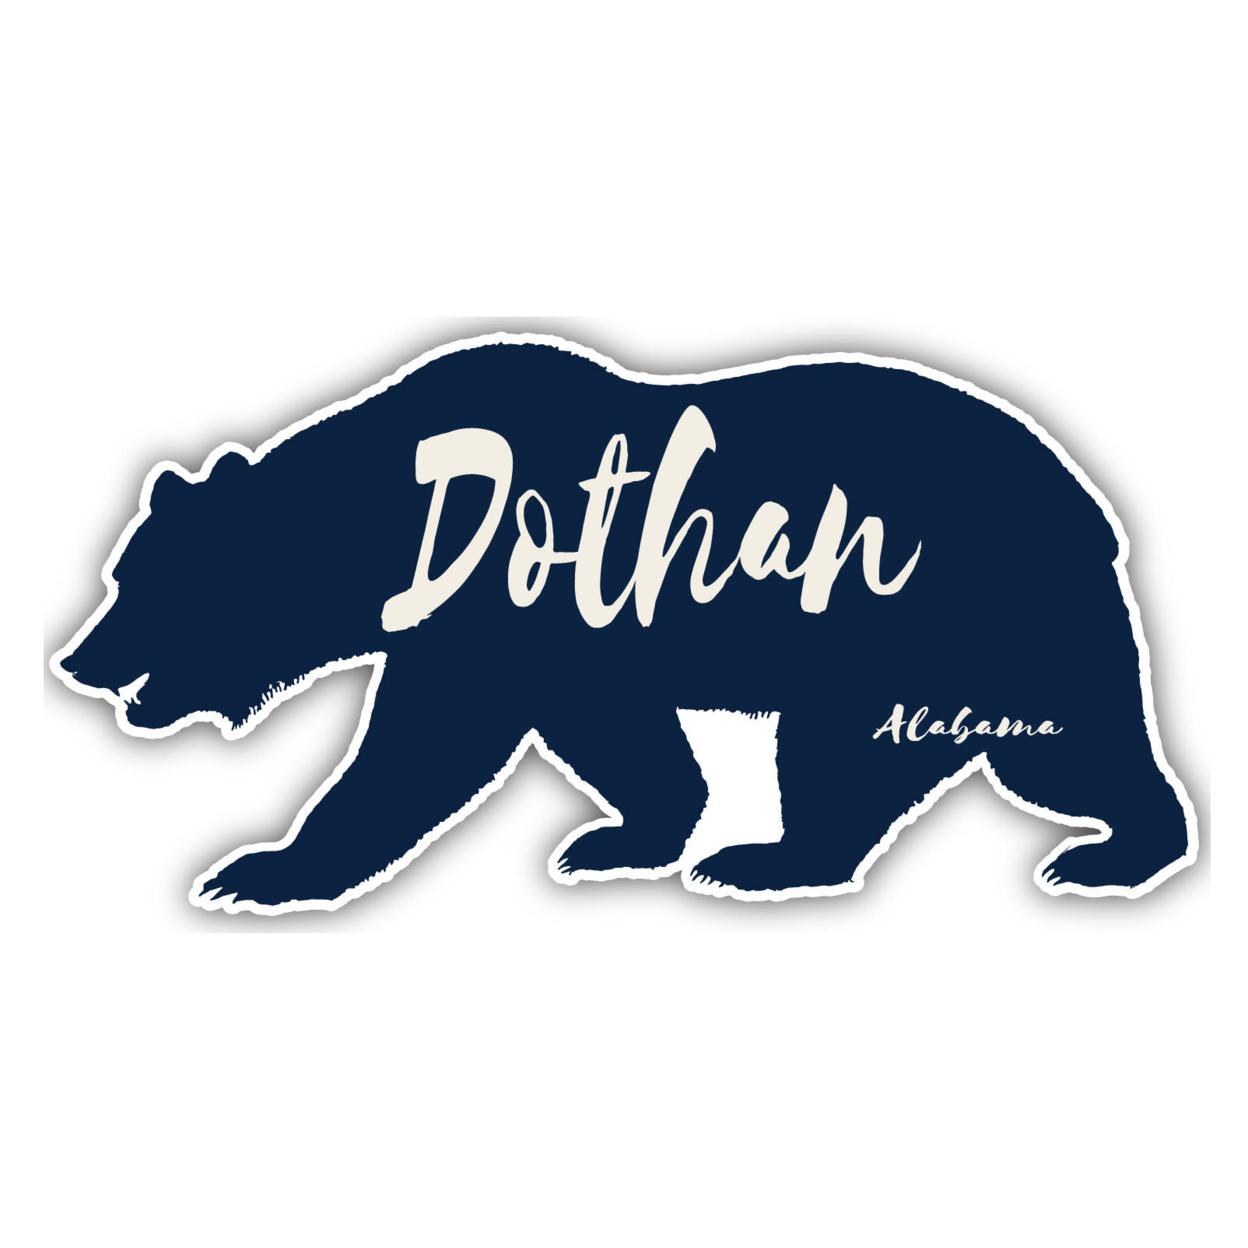 Dothan Alabama Souvenir Decorative Stickers (Choose Theme And Size) - 4-Pack, 4-Inch, Camp Life